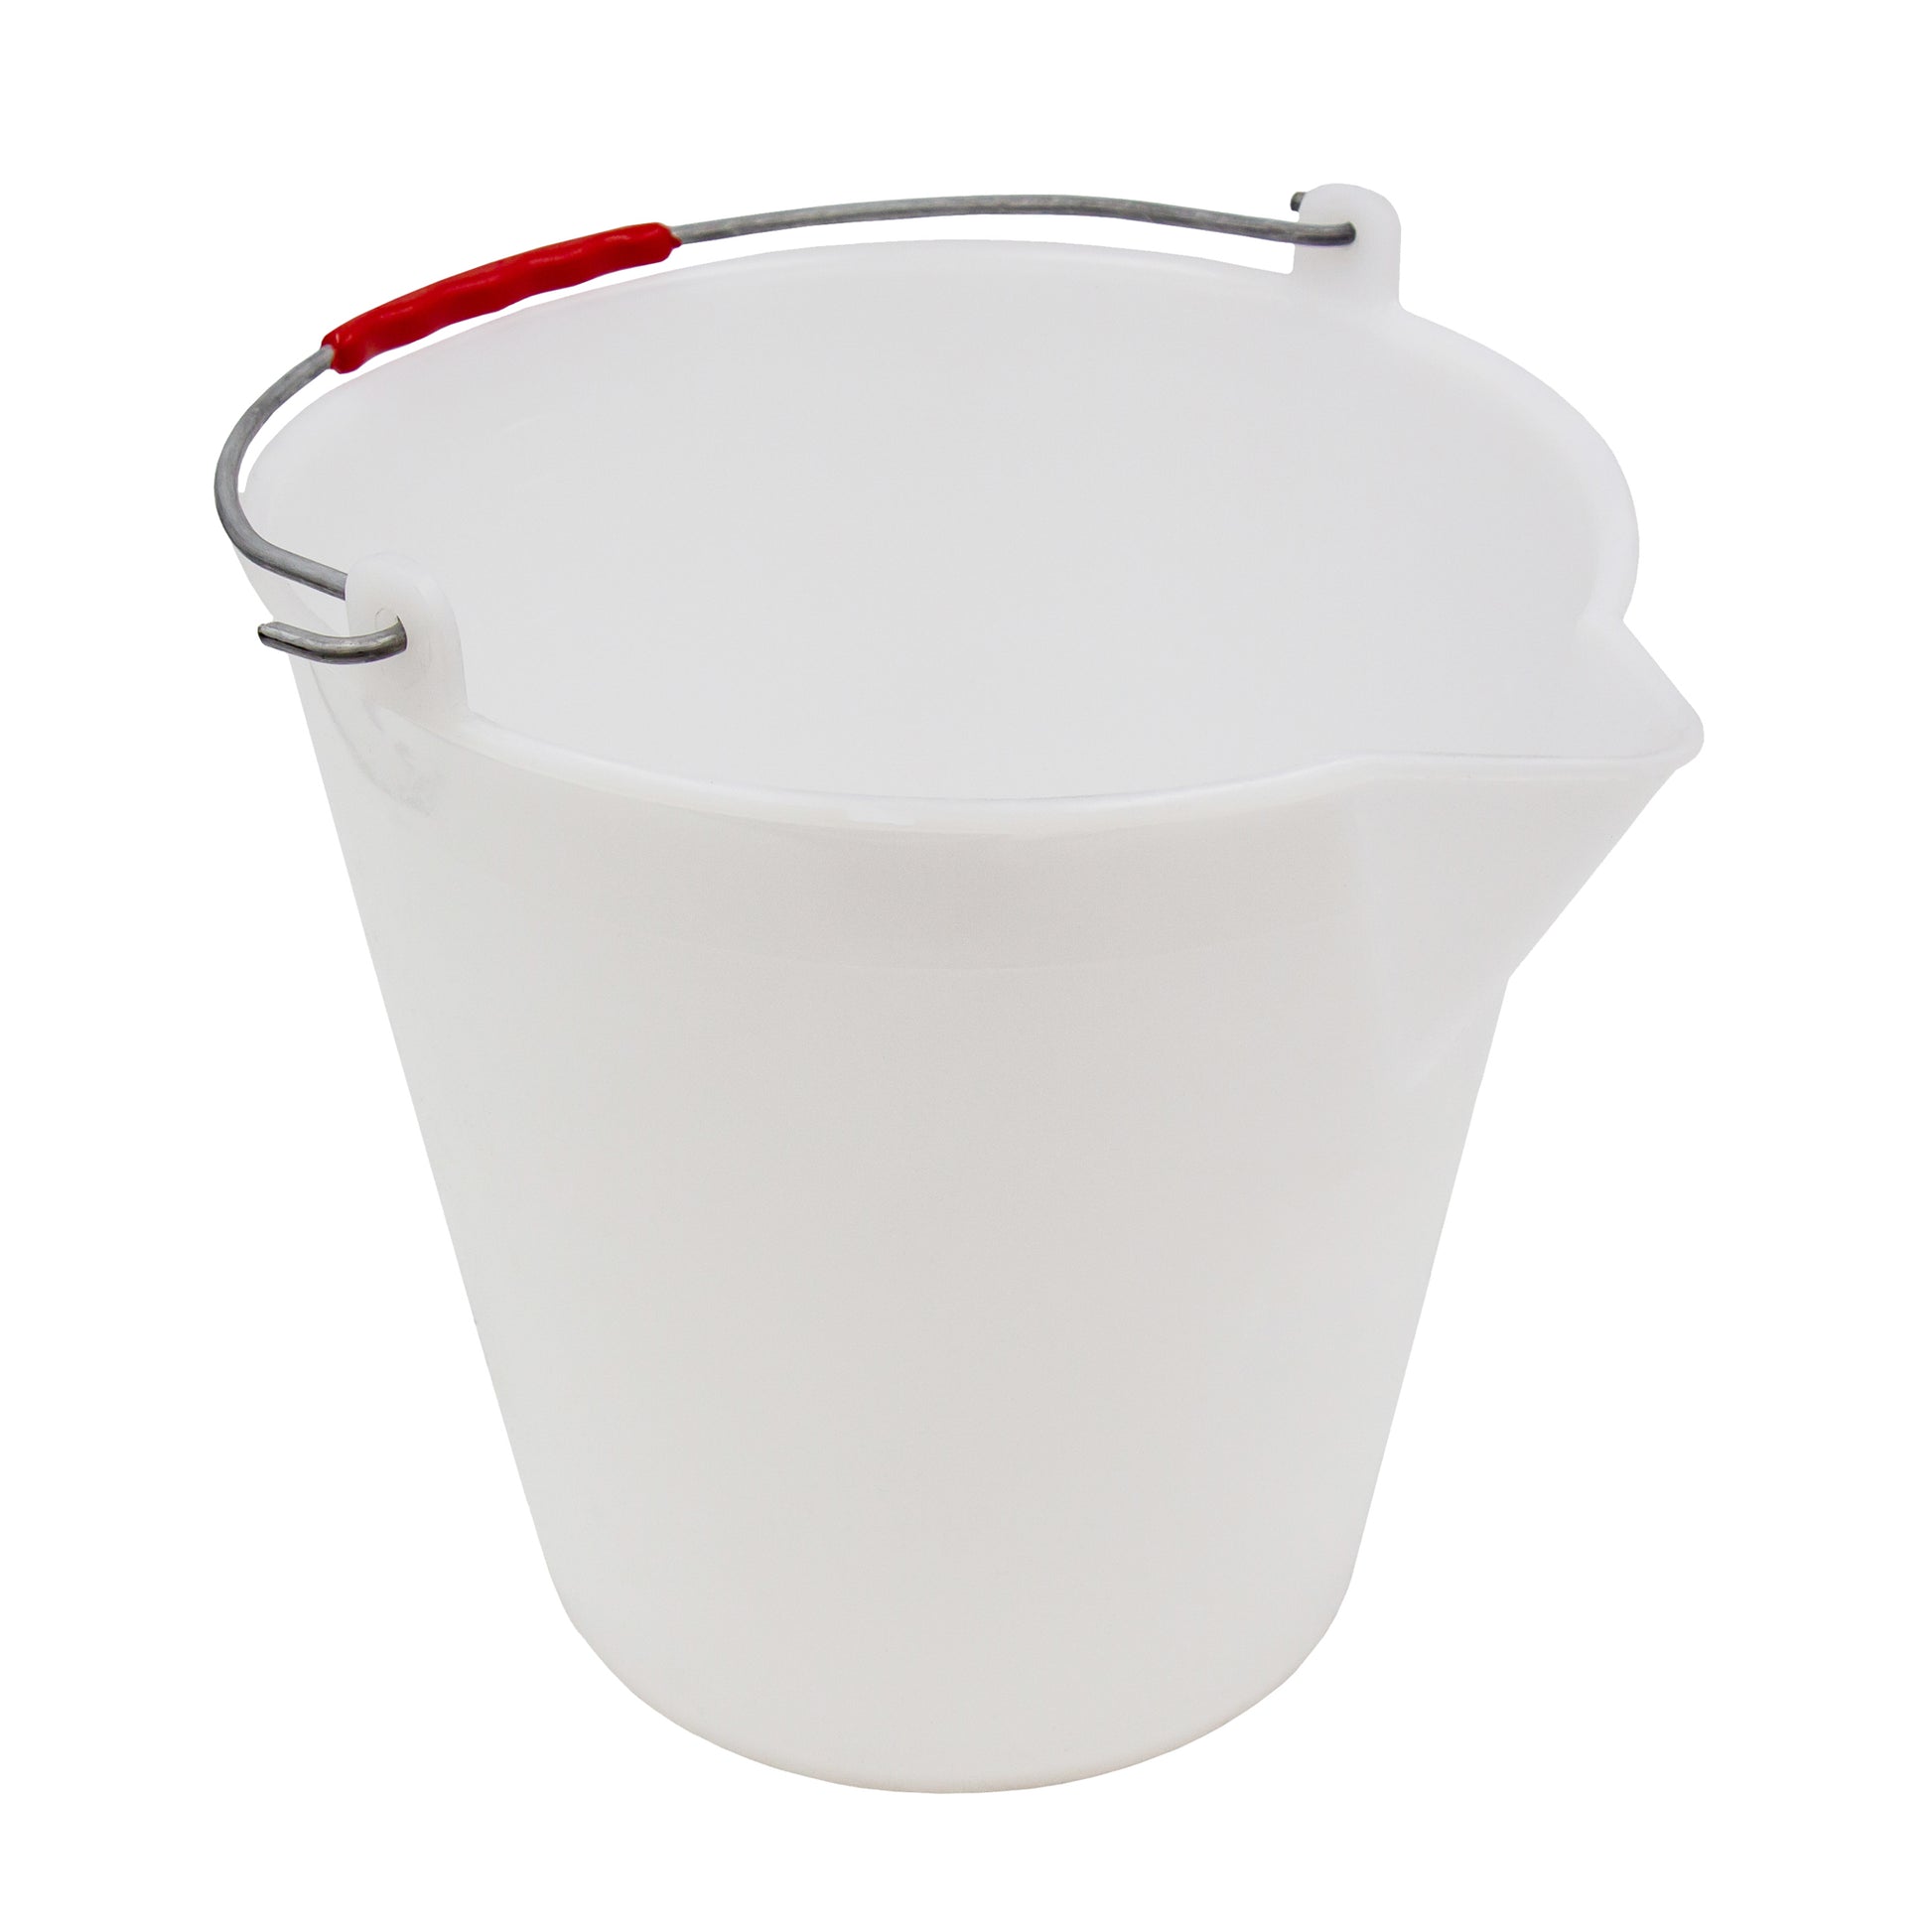 12 litre white plastic bucket with metal carry handle and easy pour spout. 